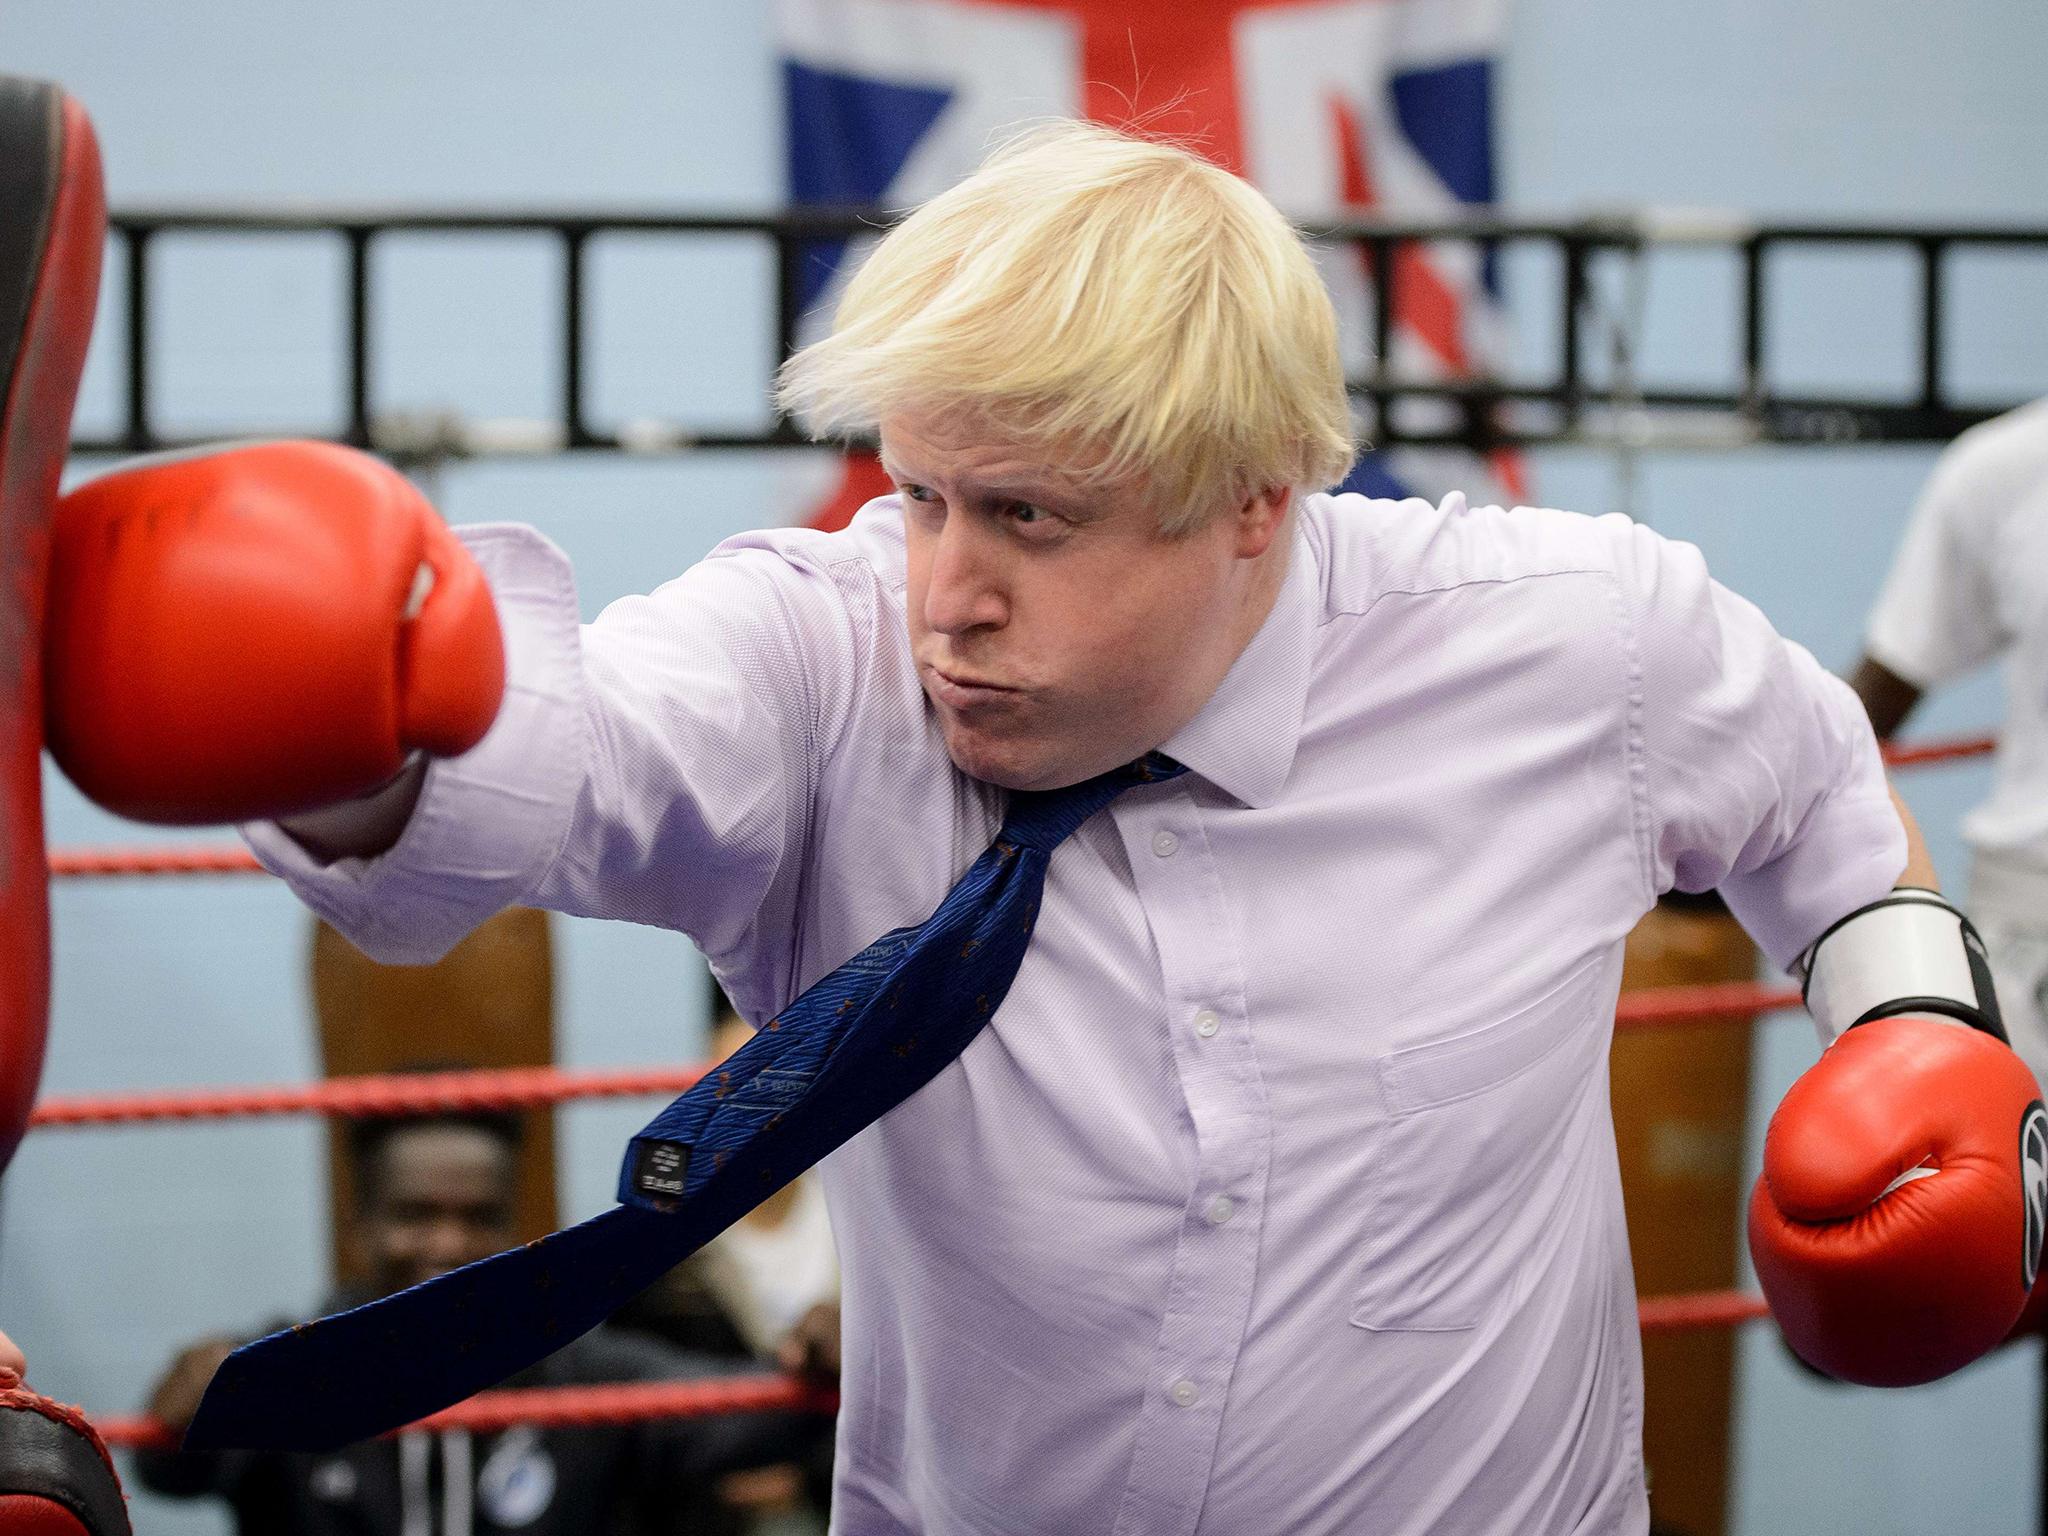 Mayor of London Boris Johnson boxes with a trainer during his visit to Fight for Peace Academy in North Woolwich, London